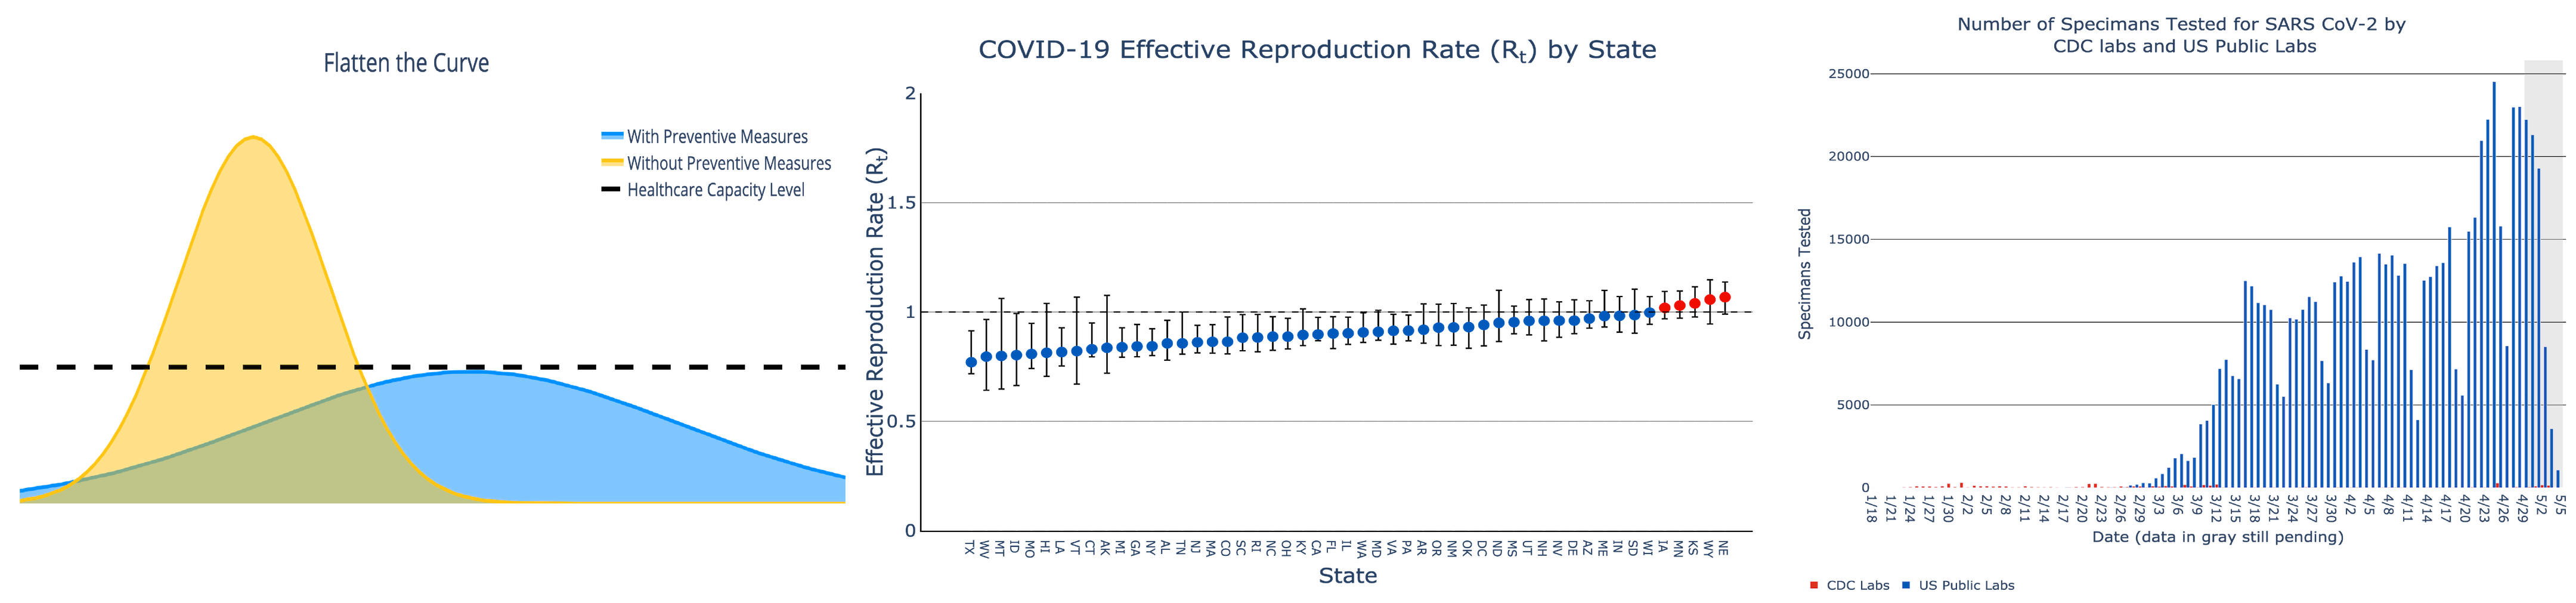 Three examples of data visualizations to inform the public about the COVID-19 pandemic. The first is titled flatten the curve, and shows two bell-shaped distributions. One distribution is tall and narrow, indicating a large peak in cases above a dashed line that represents the healthcare capacity level. The other distribution is short and wide, indicating a small drawn-out peak in cases that stays below the healthcare capacity line. The second graph shows the reproduction rate of the virus, on the y-axis, by state, on the x-axis. The third shows the number of tests conducted by the CDC and US Public labs over time.